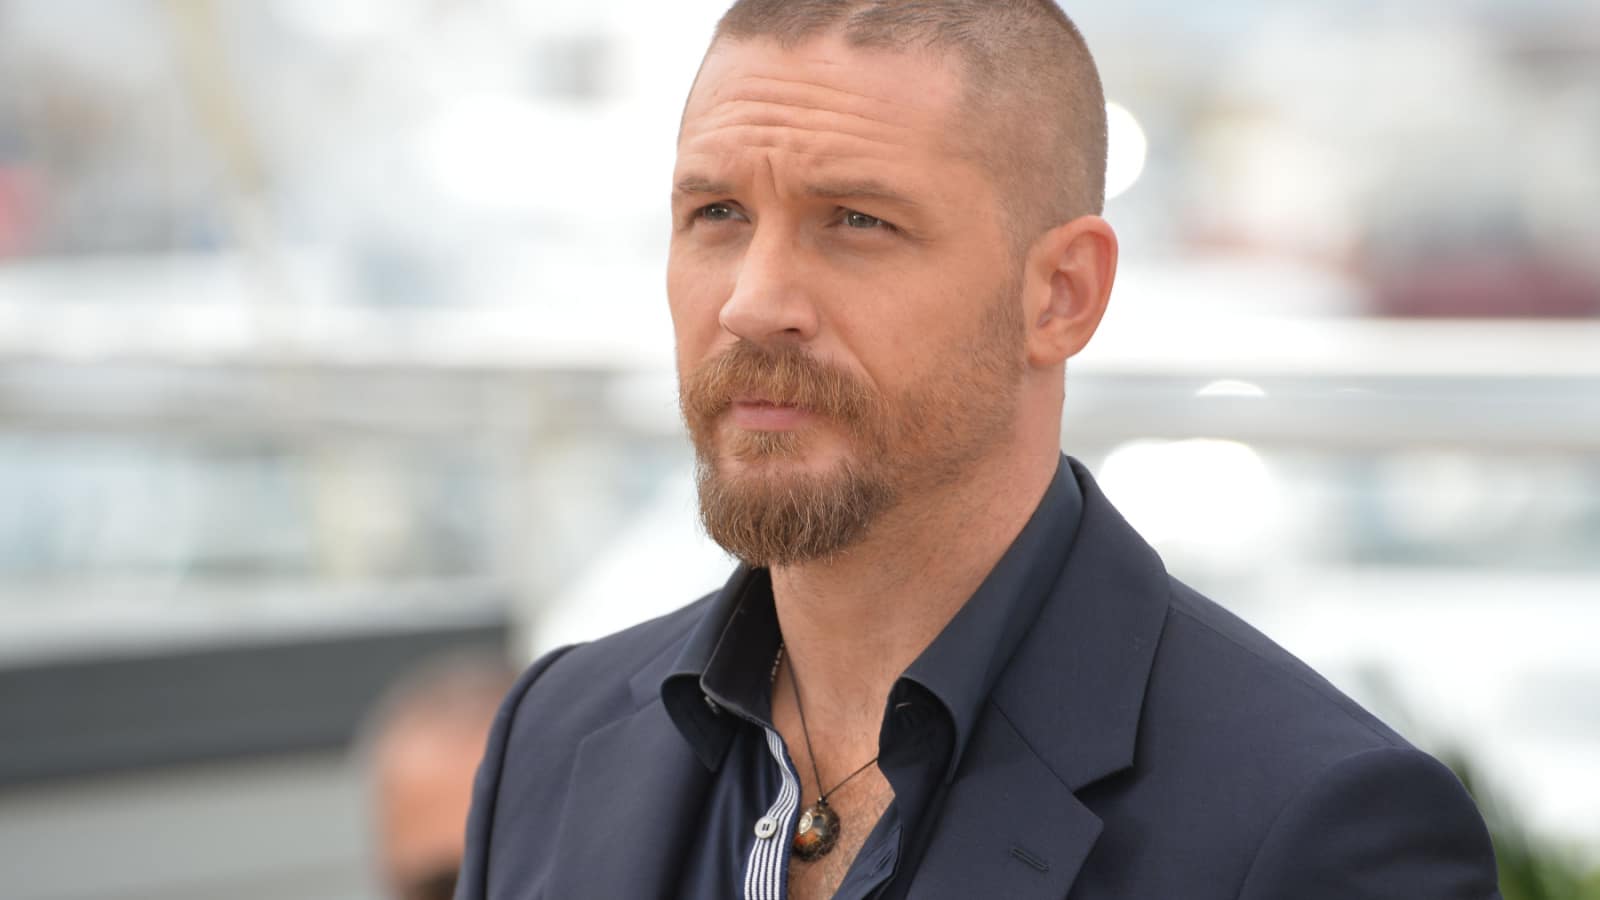 CANNES, FRANCE - MAY 14, 2015: Tom Hardy at the photocall for his movie "Mad Max: Fury Road" at the 68th Festival de Cannes.